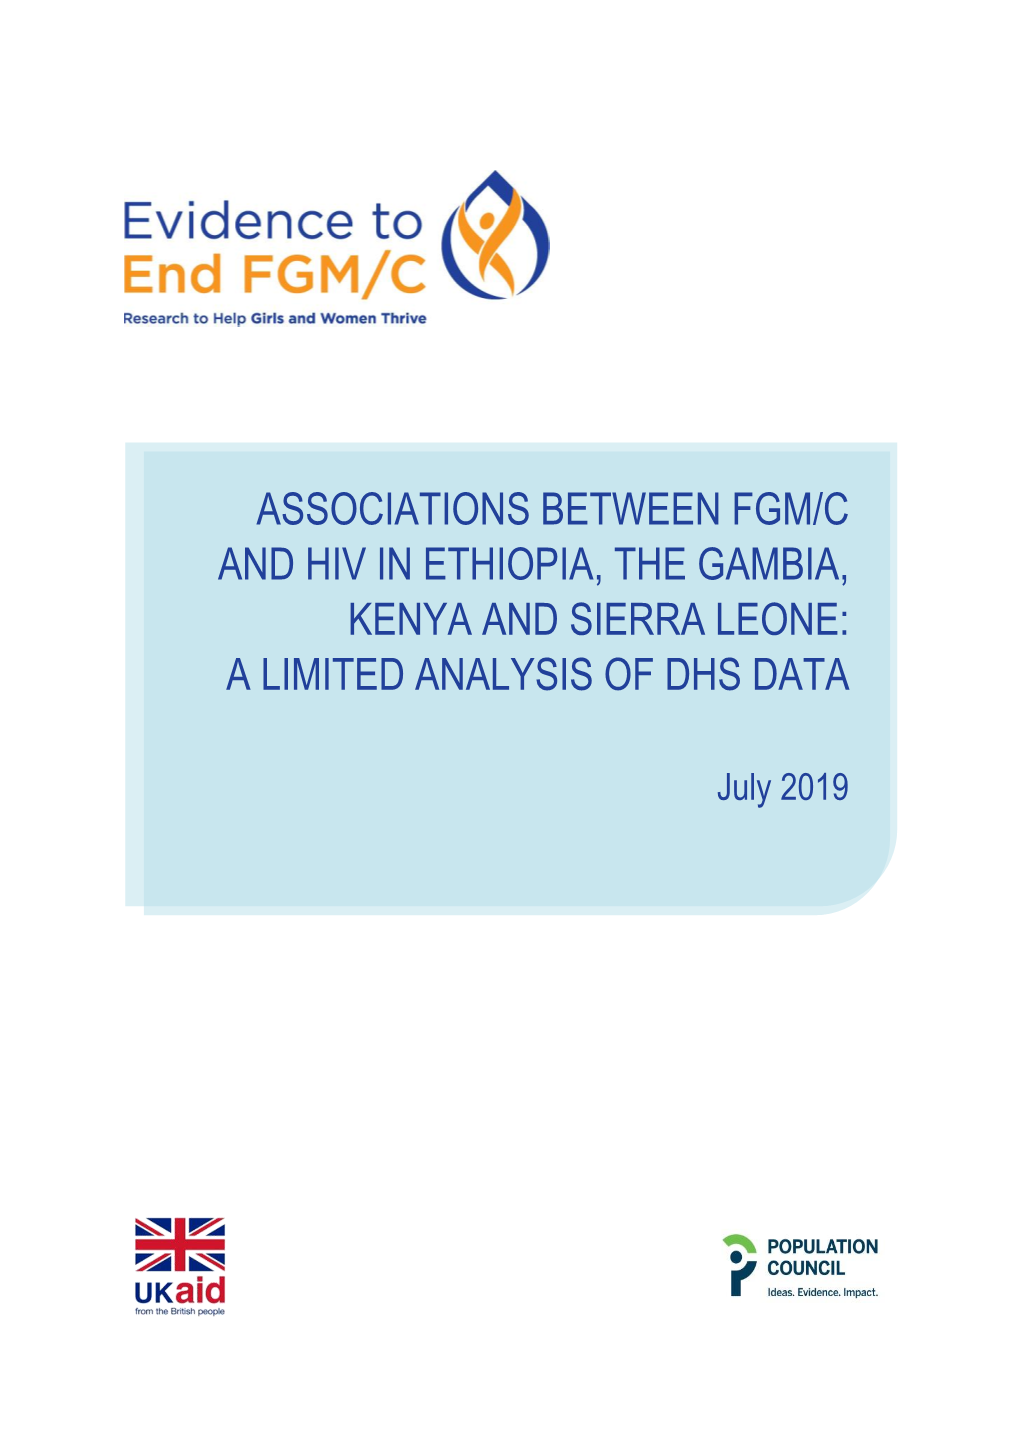 Associations Between Fgm/C and Hiv in Ethiopia, Gambia, Kenya and Sierra Leone: a Limited Analysis of Dhs Data